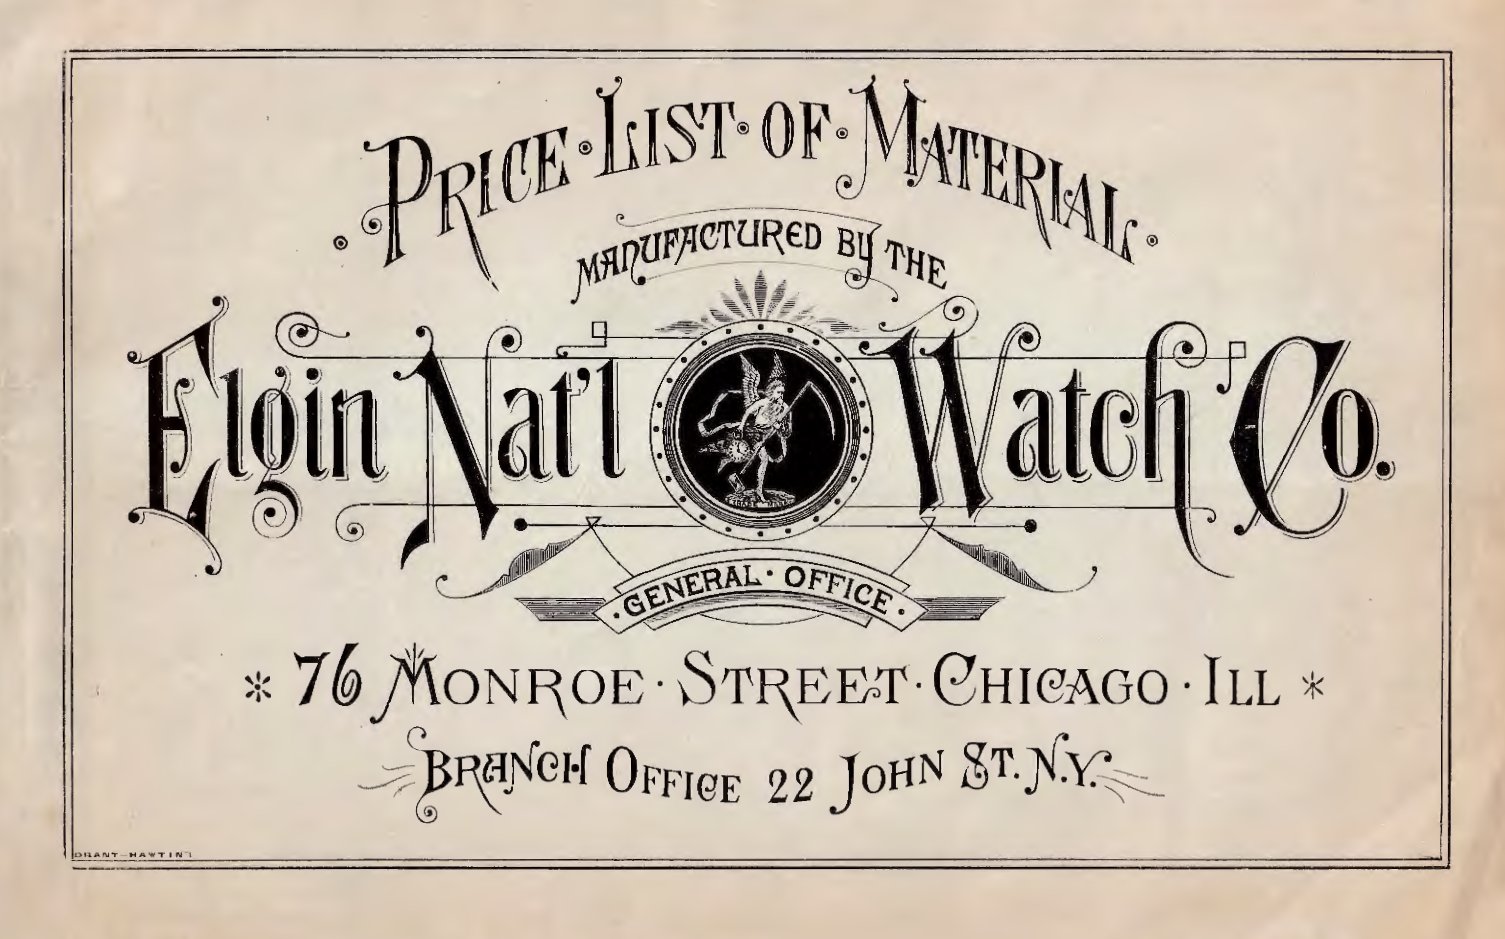 Price List of Material Manufactured by the Elgin Nat'l Watch Co. (1882) Cover Image